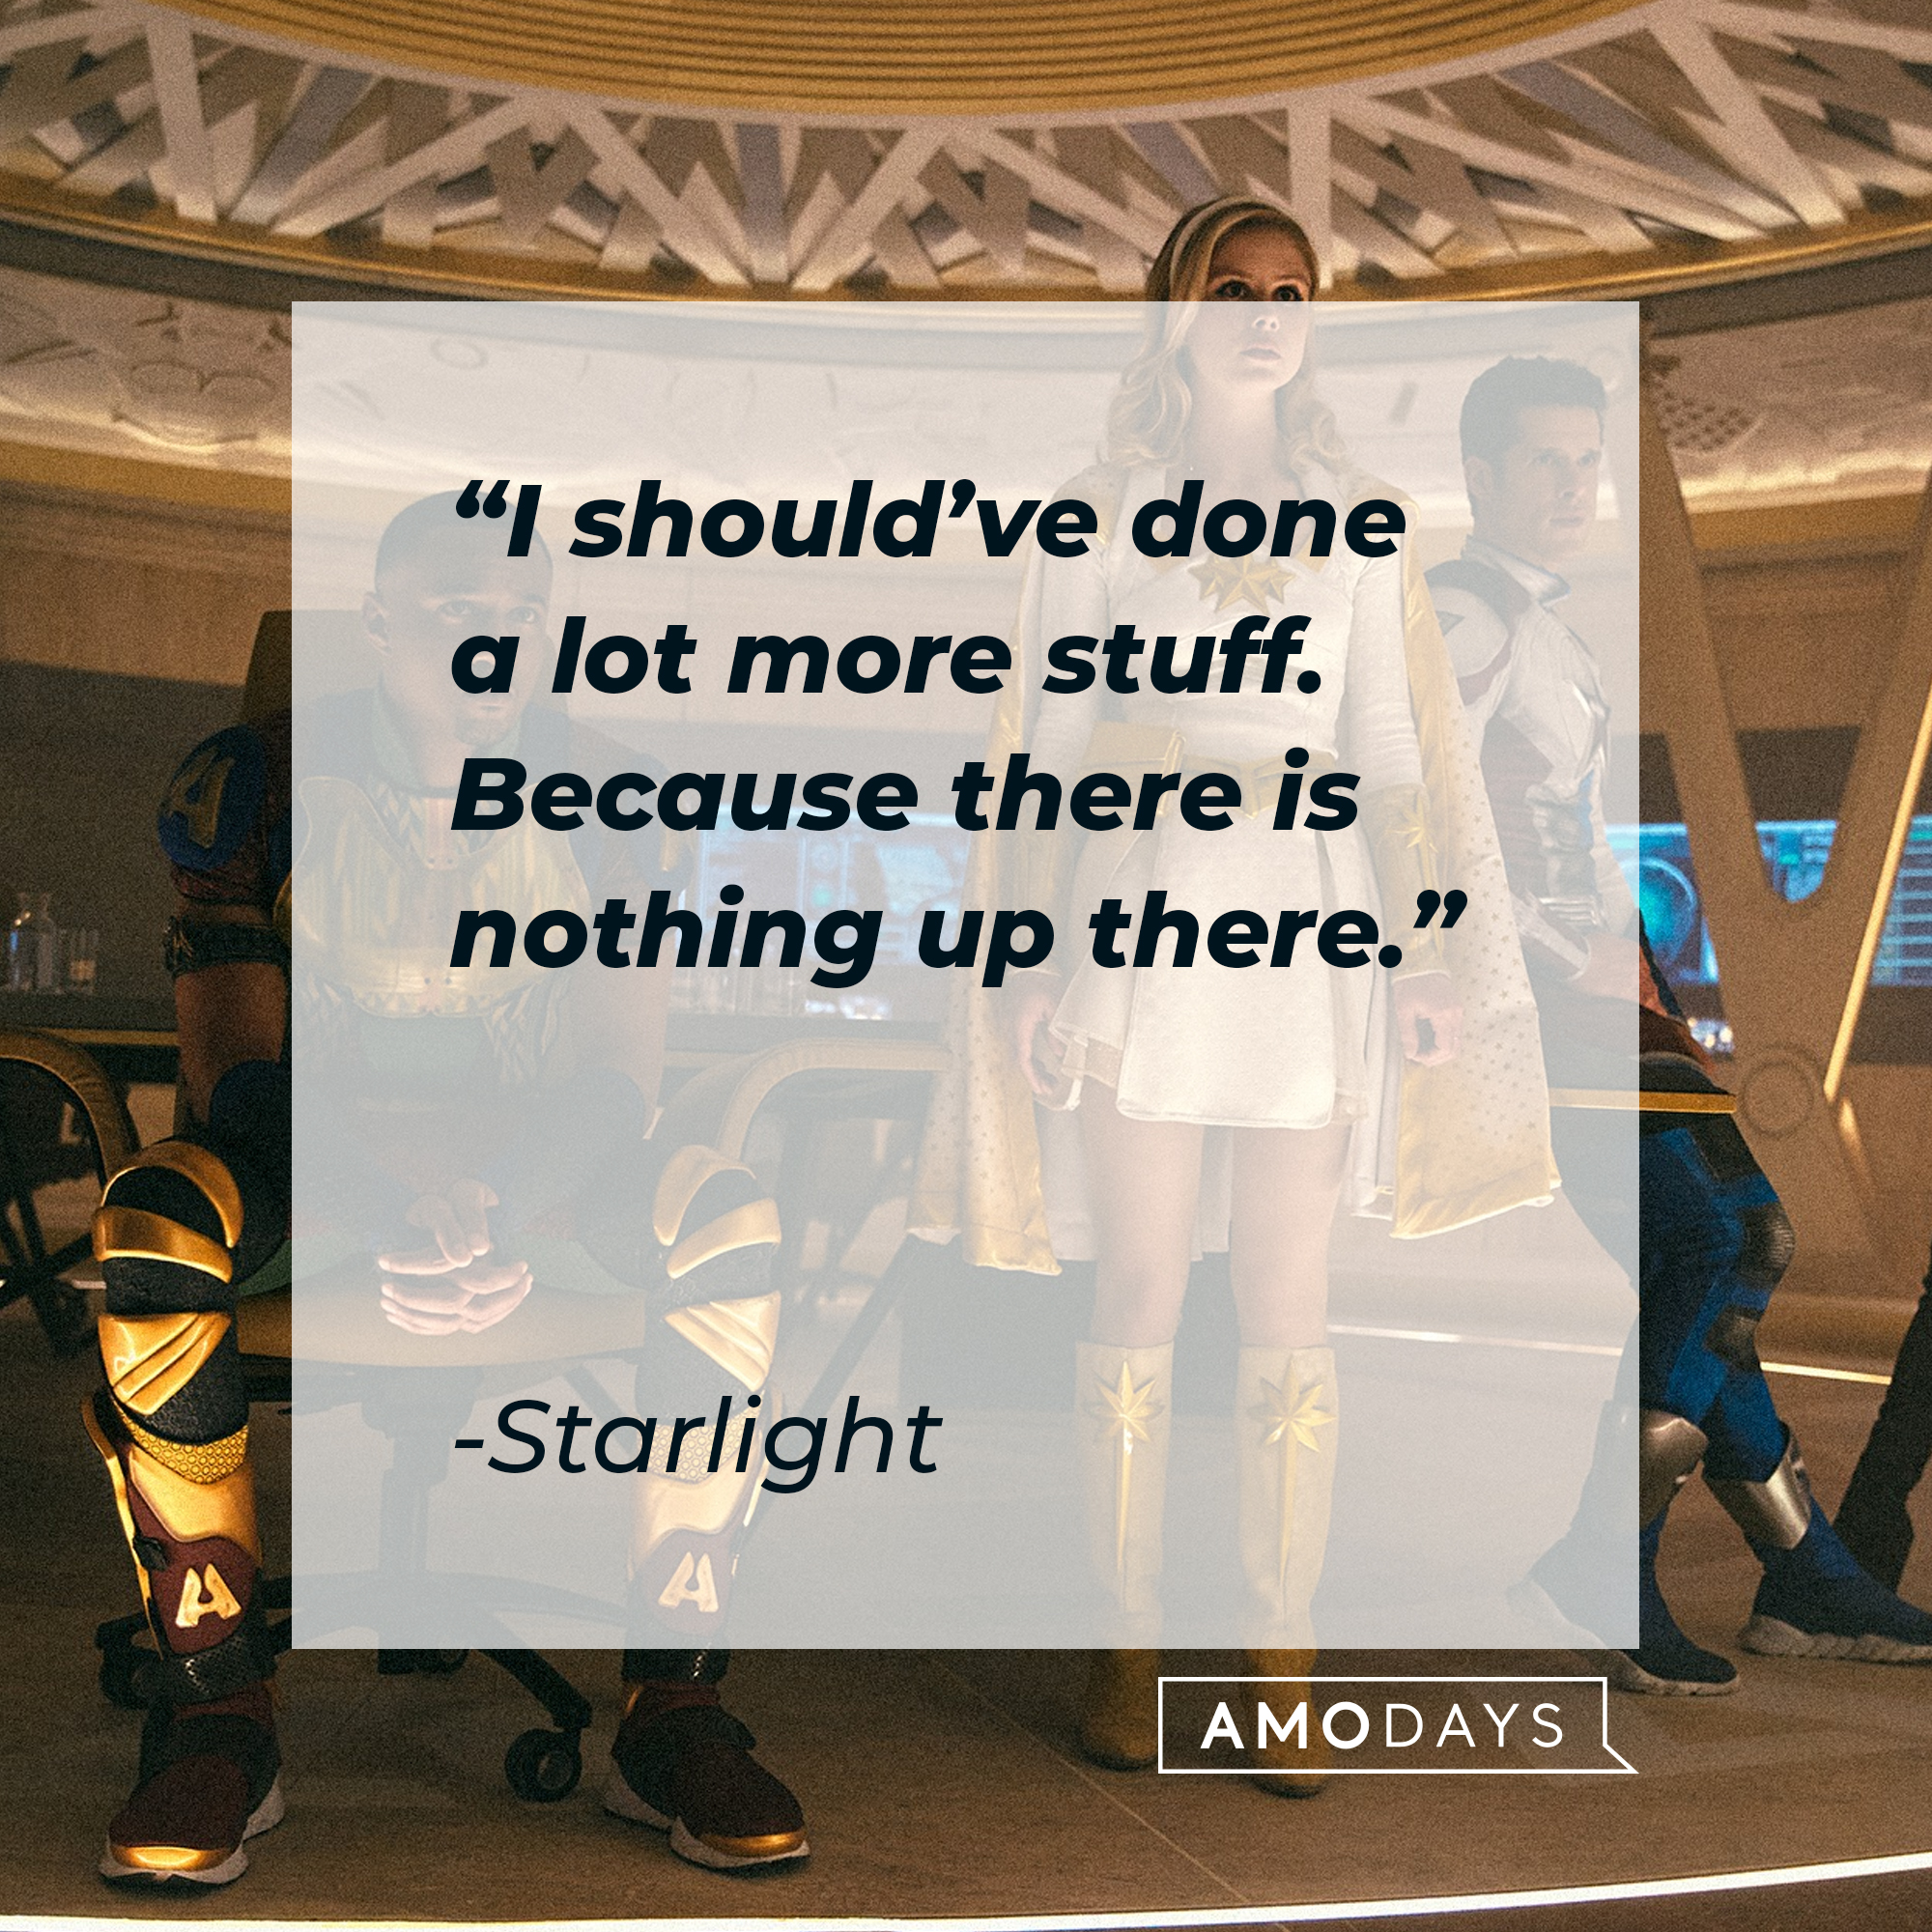 Starlight and other characters, with her quote: "I should’ve done a lot more stuff. Because there is nothing up there." | Source: facebook.com/TheBoysTV